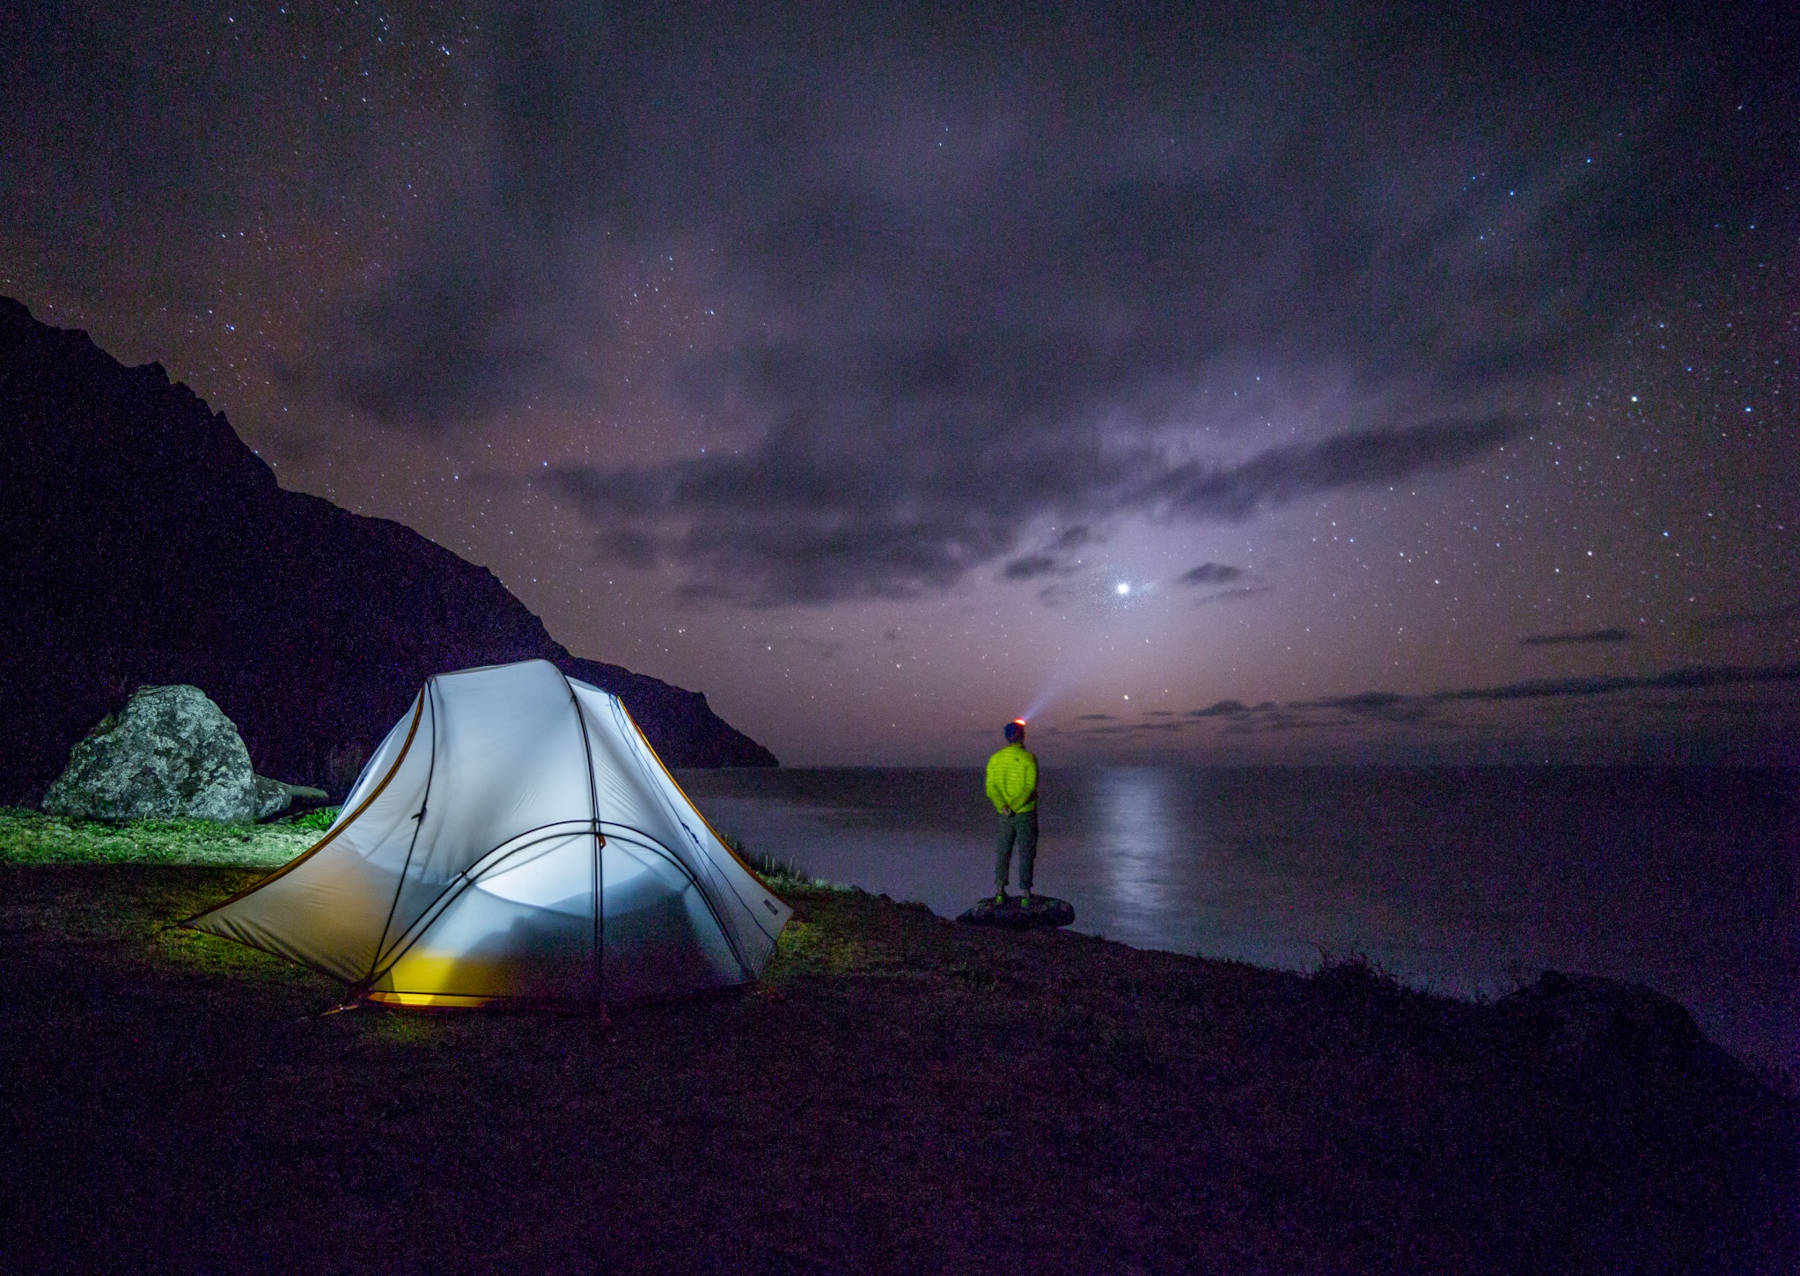 Choosing the right headlamp for hiking and camping is important. This camper is enjoying the night skies with his red light feature.